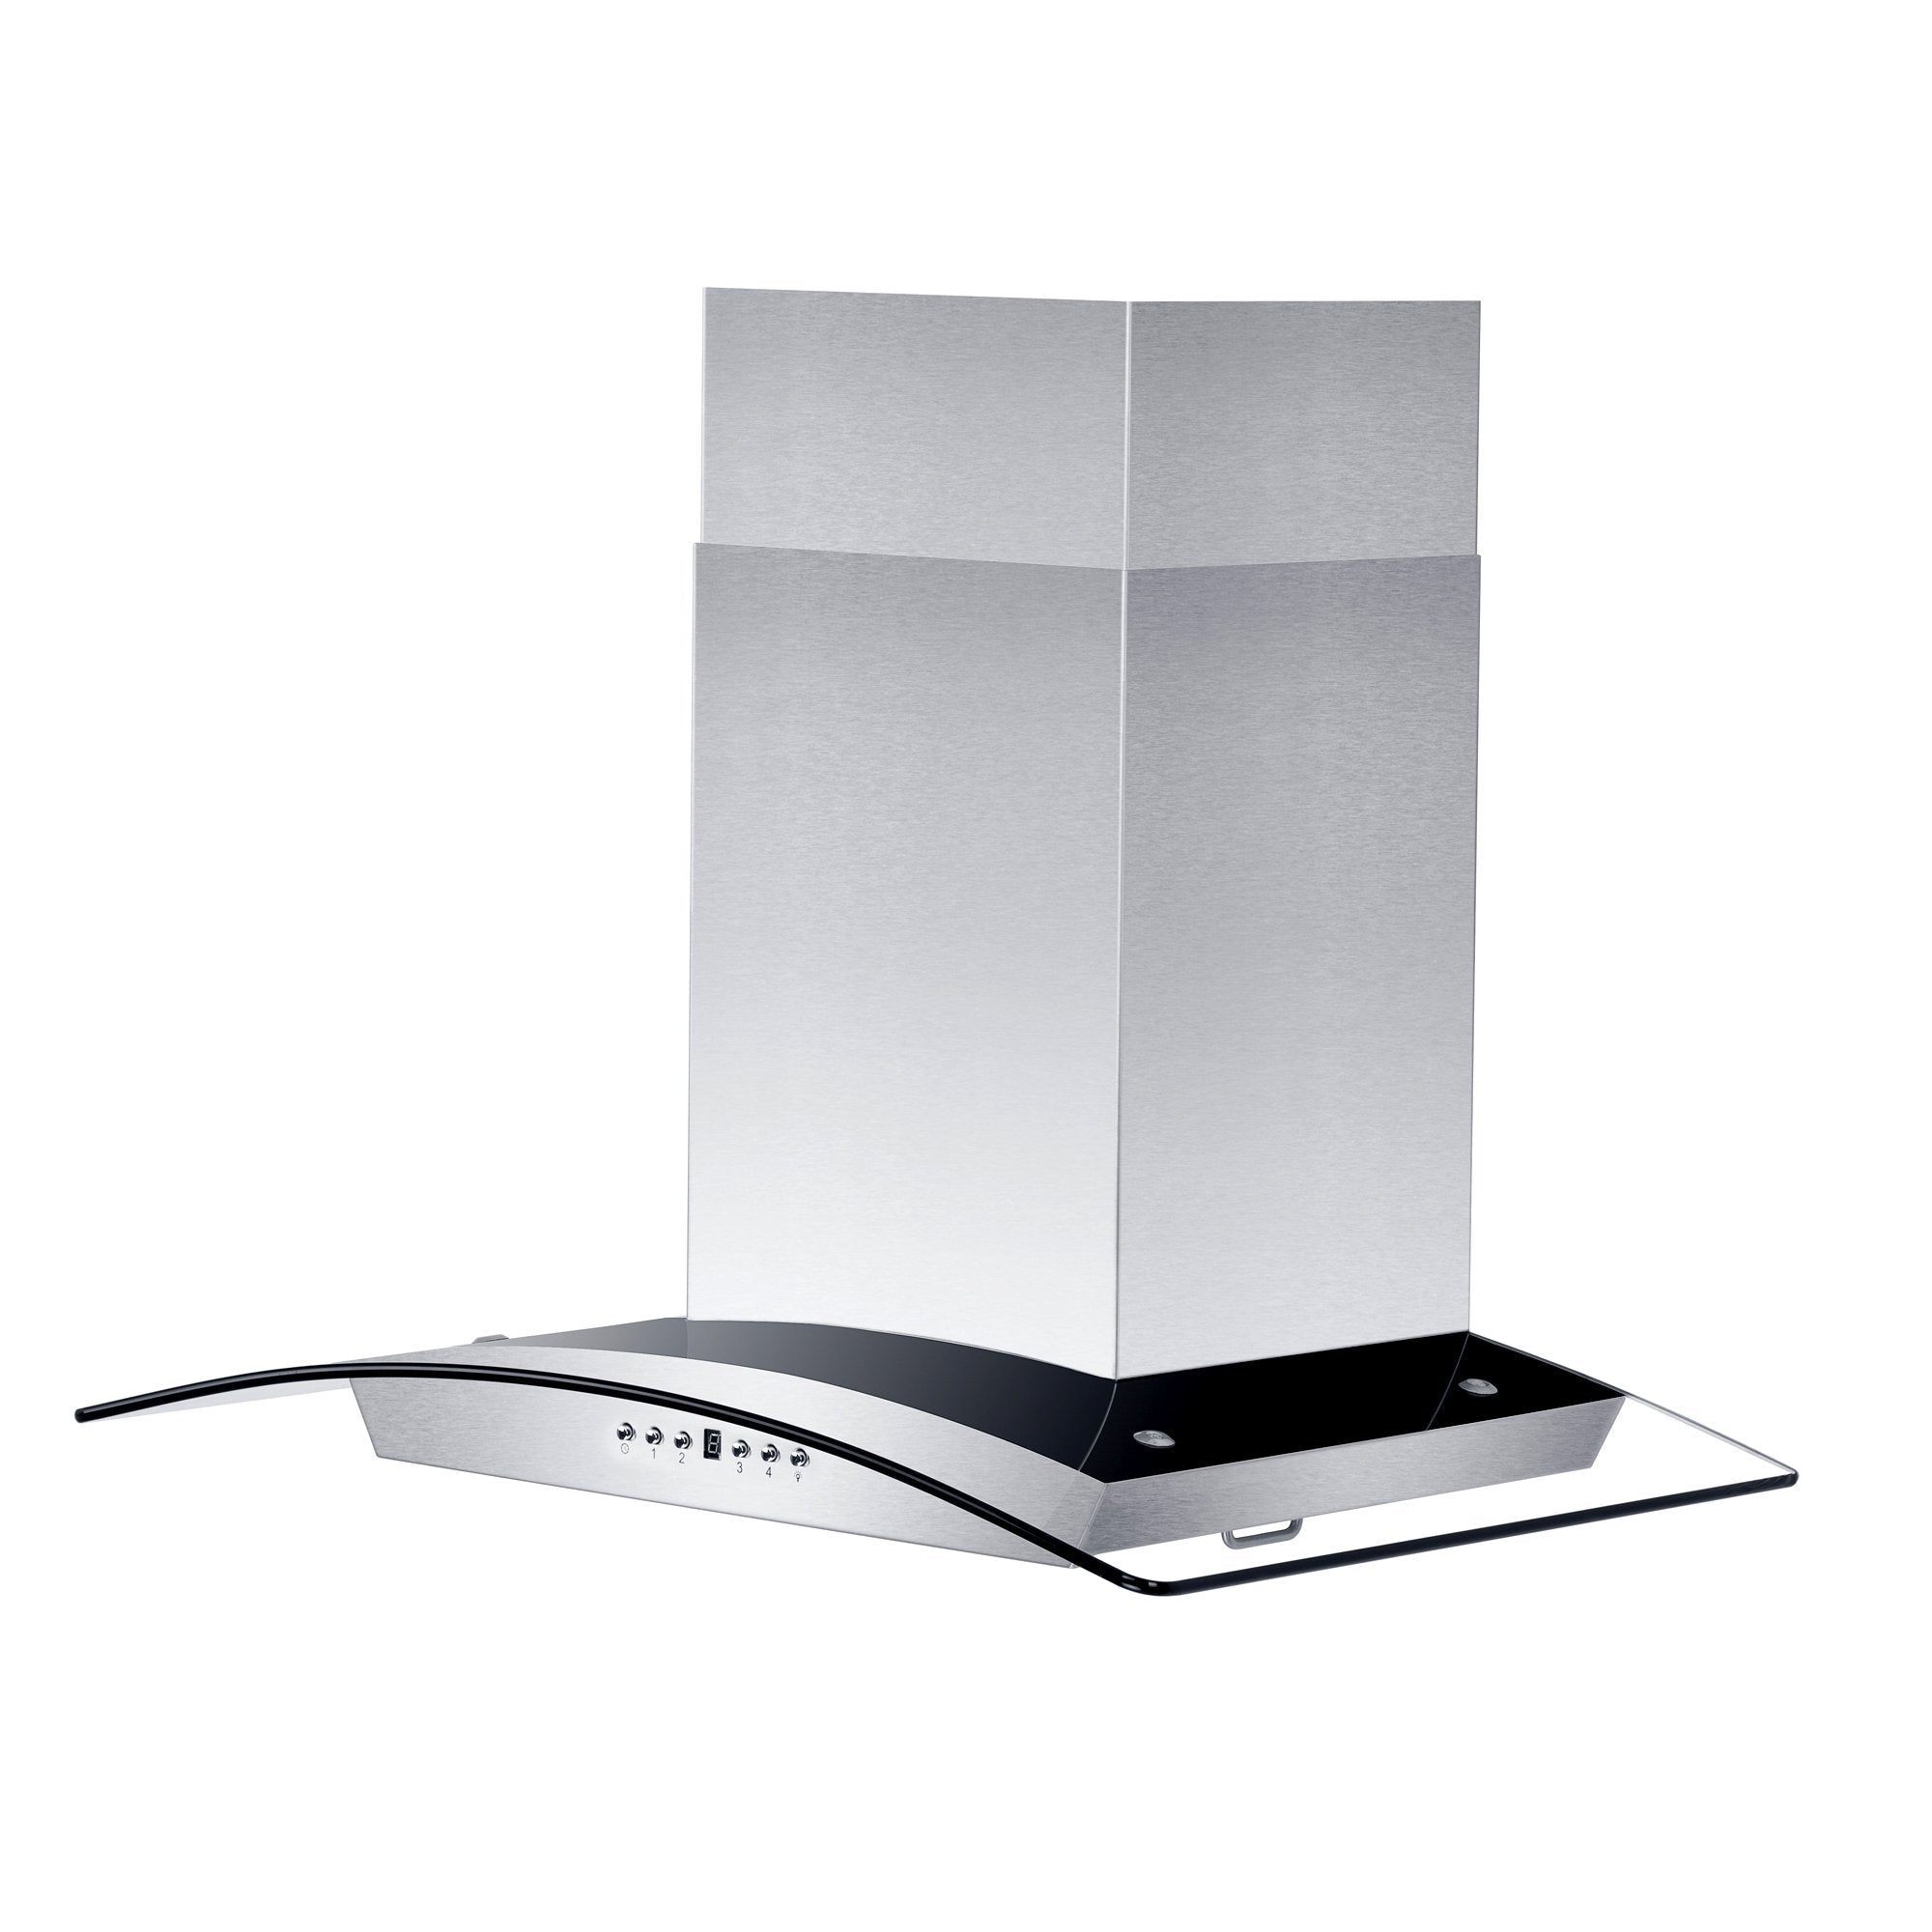 ZLINE Convertible Vent Wall Mount Range Hood in Stainless Steel & Glass (KZ) side above.